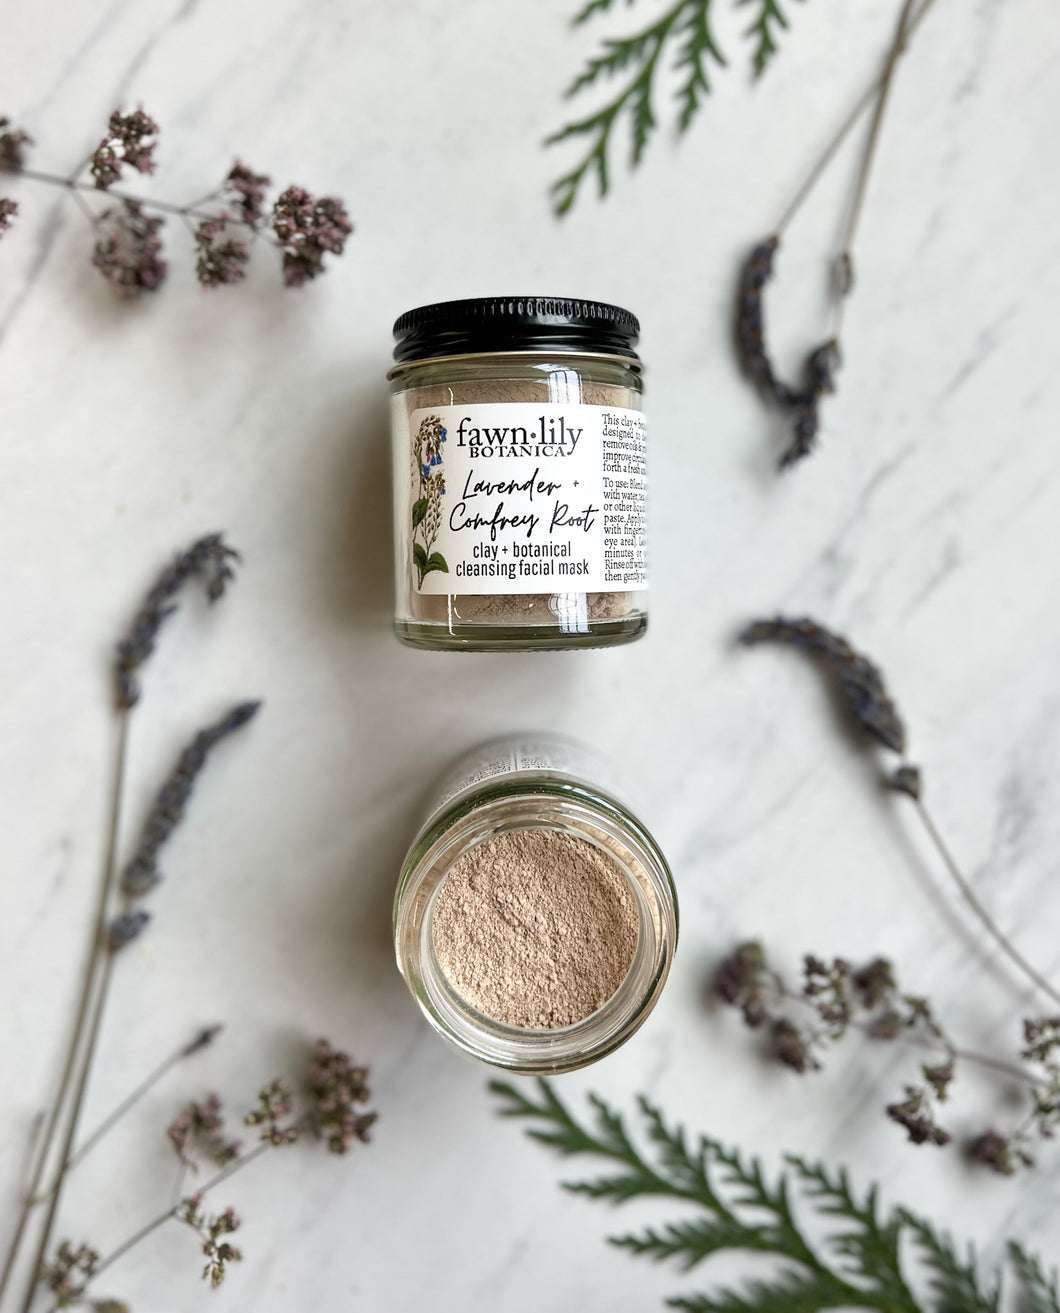 Lavender Comfrey Clay Mask | Fawn Lily Botanica - Gentle, effective formula to cleanse, tone & bring a fresh glow. Made with clays, botanicals, herbal extracts, essential oils. The best natural clay face mask!